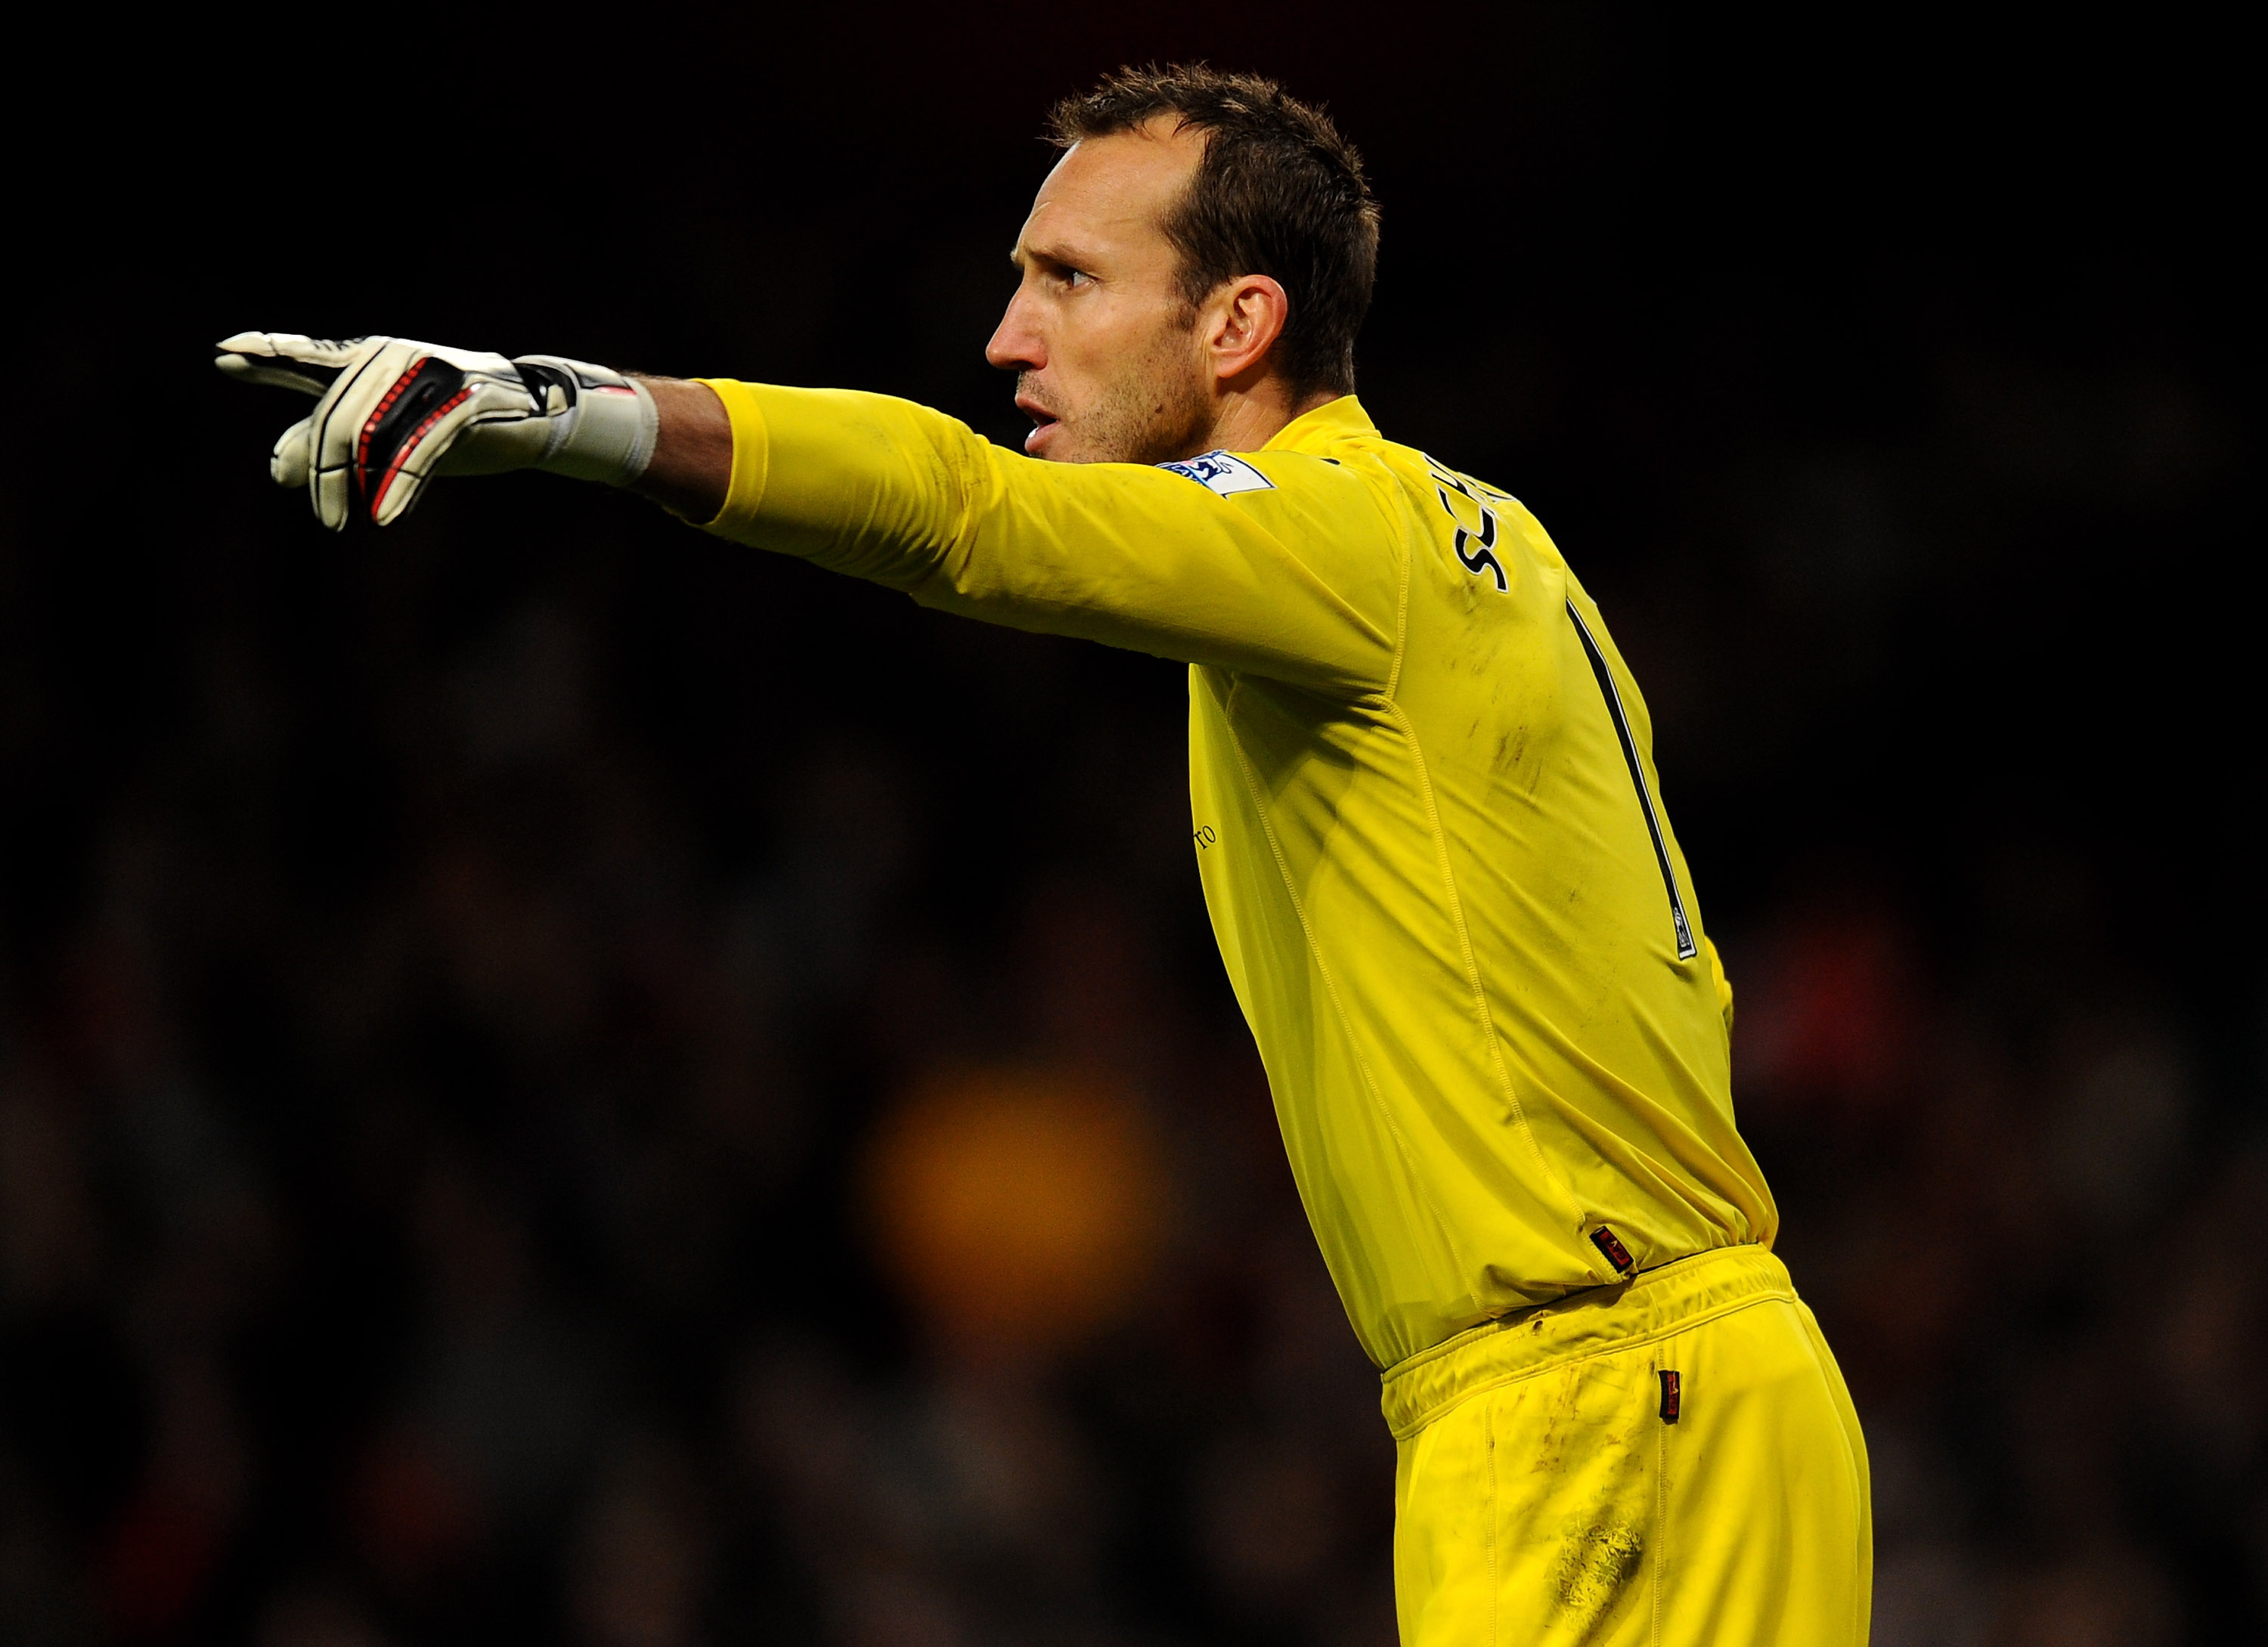 LONDON, ENGLAND - DECEMBER 04:  Mark Schwarzer of Fulham reacts during the Barclays Premier League match between Arsenal and Fulham at the Emirates Stadium on December 4, 2010 in London, England.  (Photo by Mike Hewitt/Getty Images)